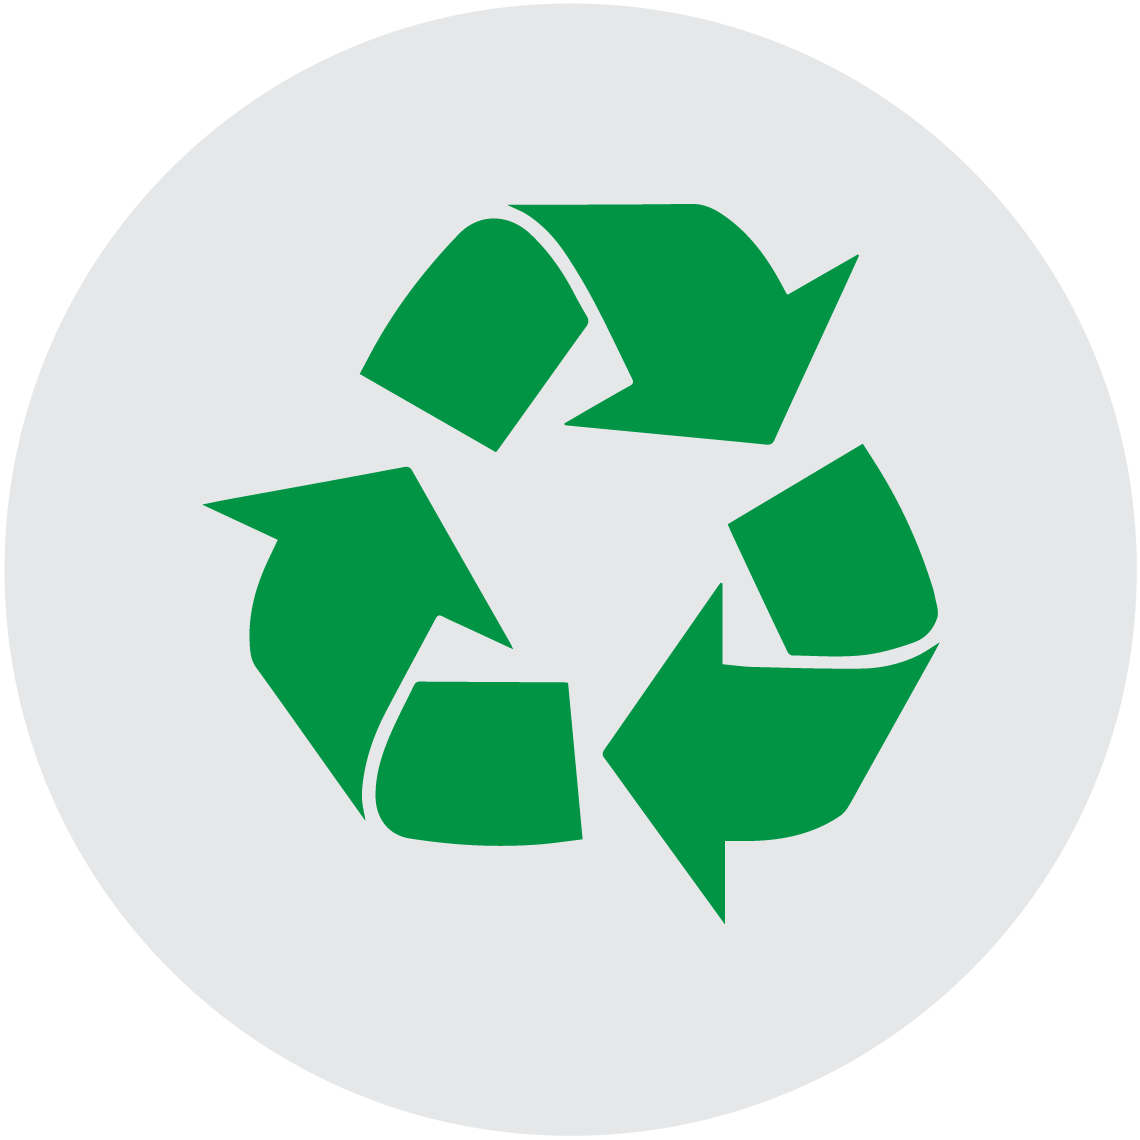 Project Recycle Ltd